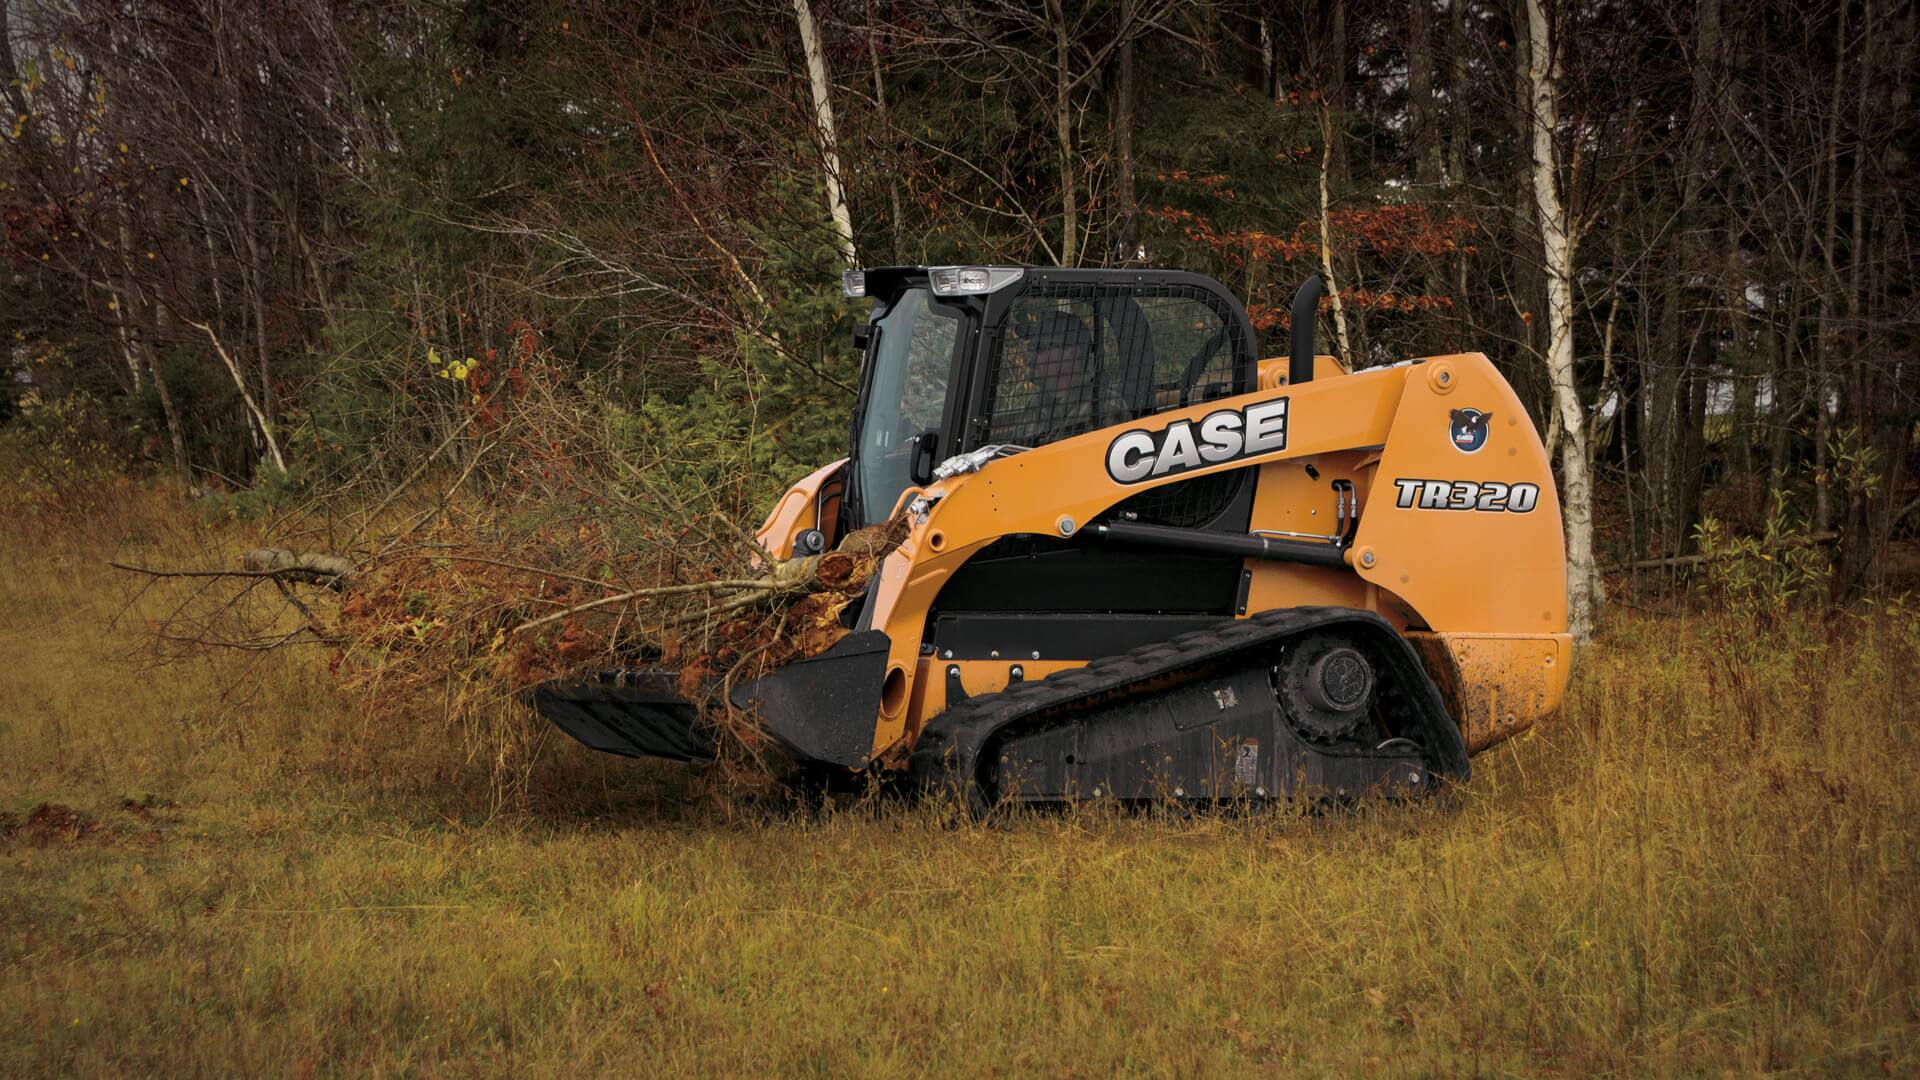 CASE TR320 Compact Track Loader | CASE Construction Equipment